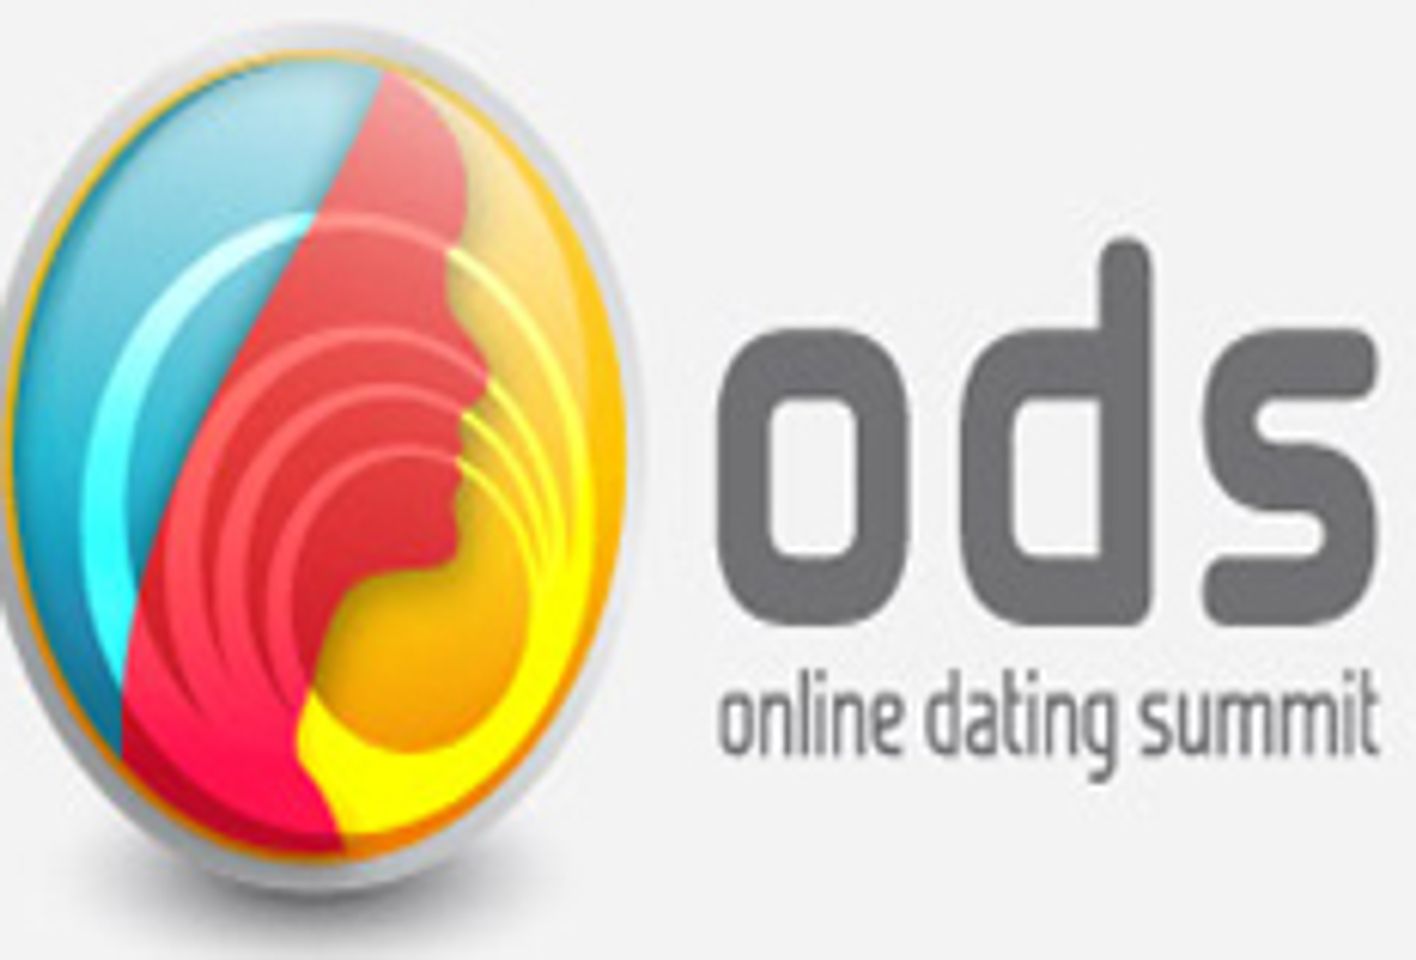 Leading Professionals Confirmed as Speakers at First Online Dating Summit